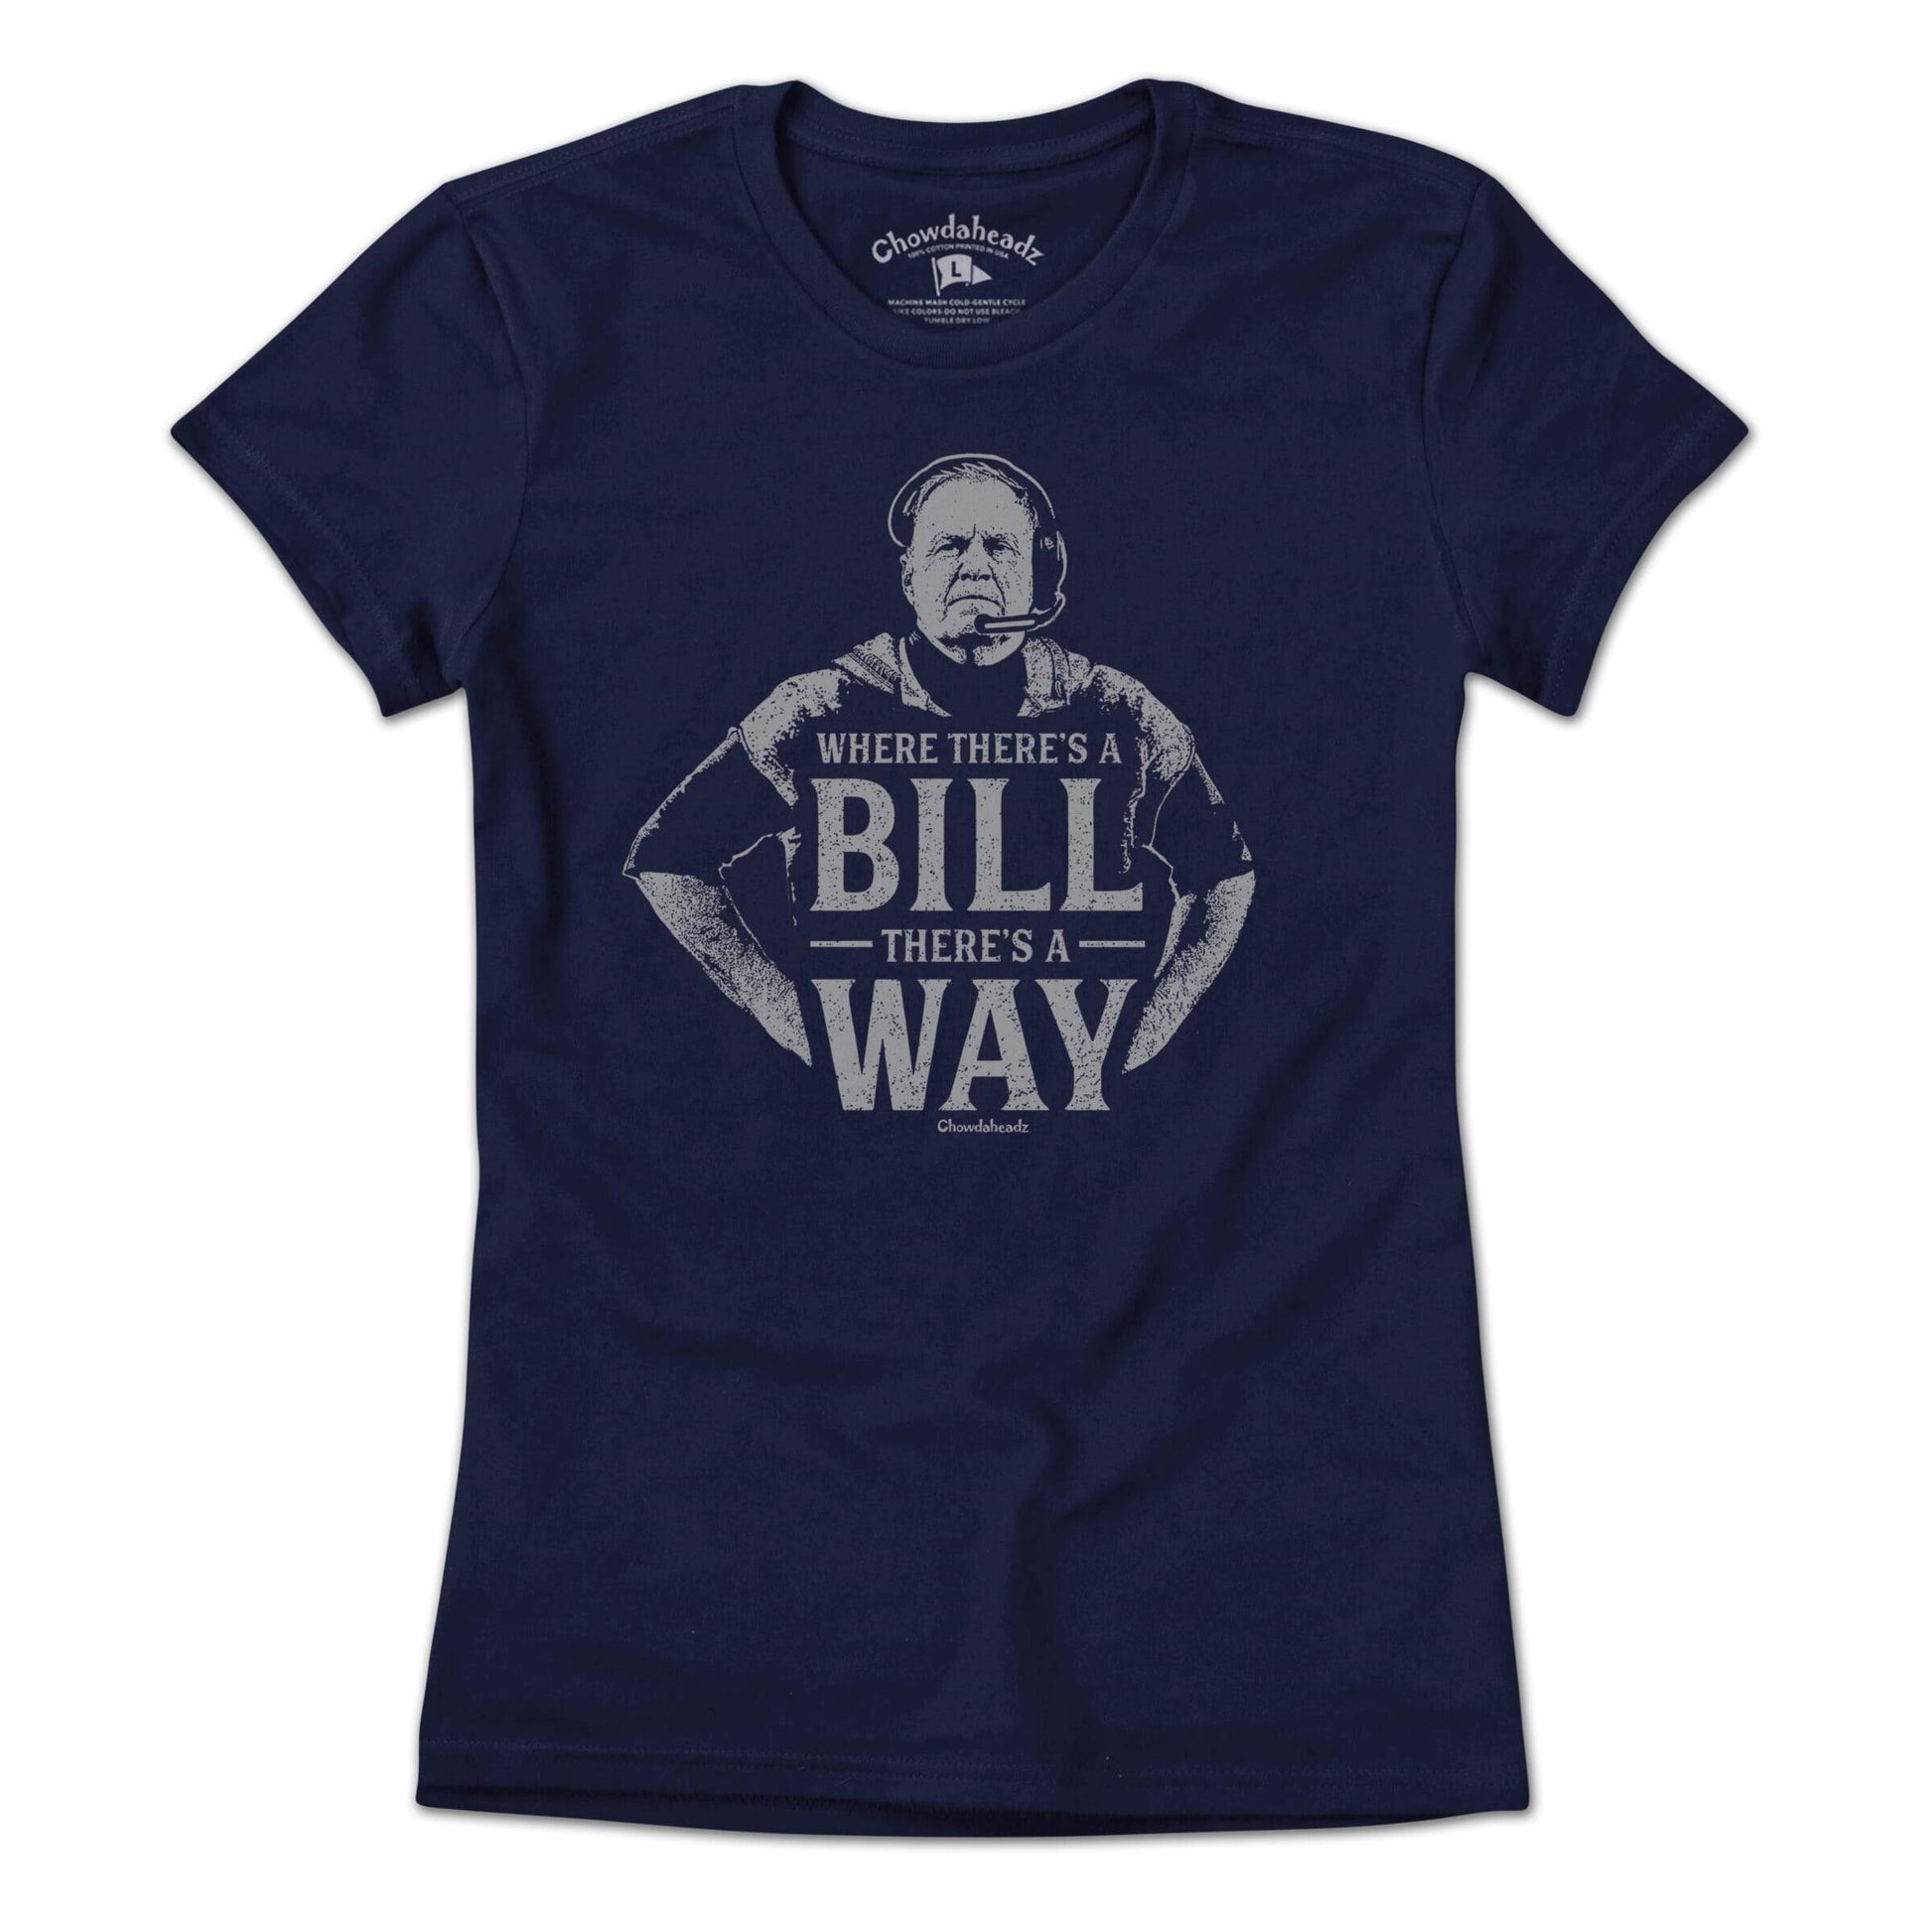 Where There's a Bill There's a Way T-Shirt - Chowdaheadz